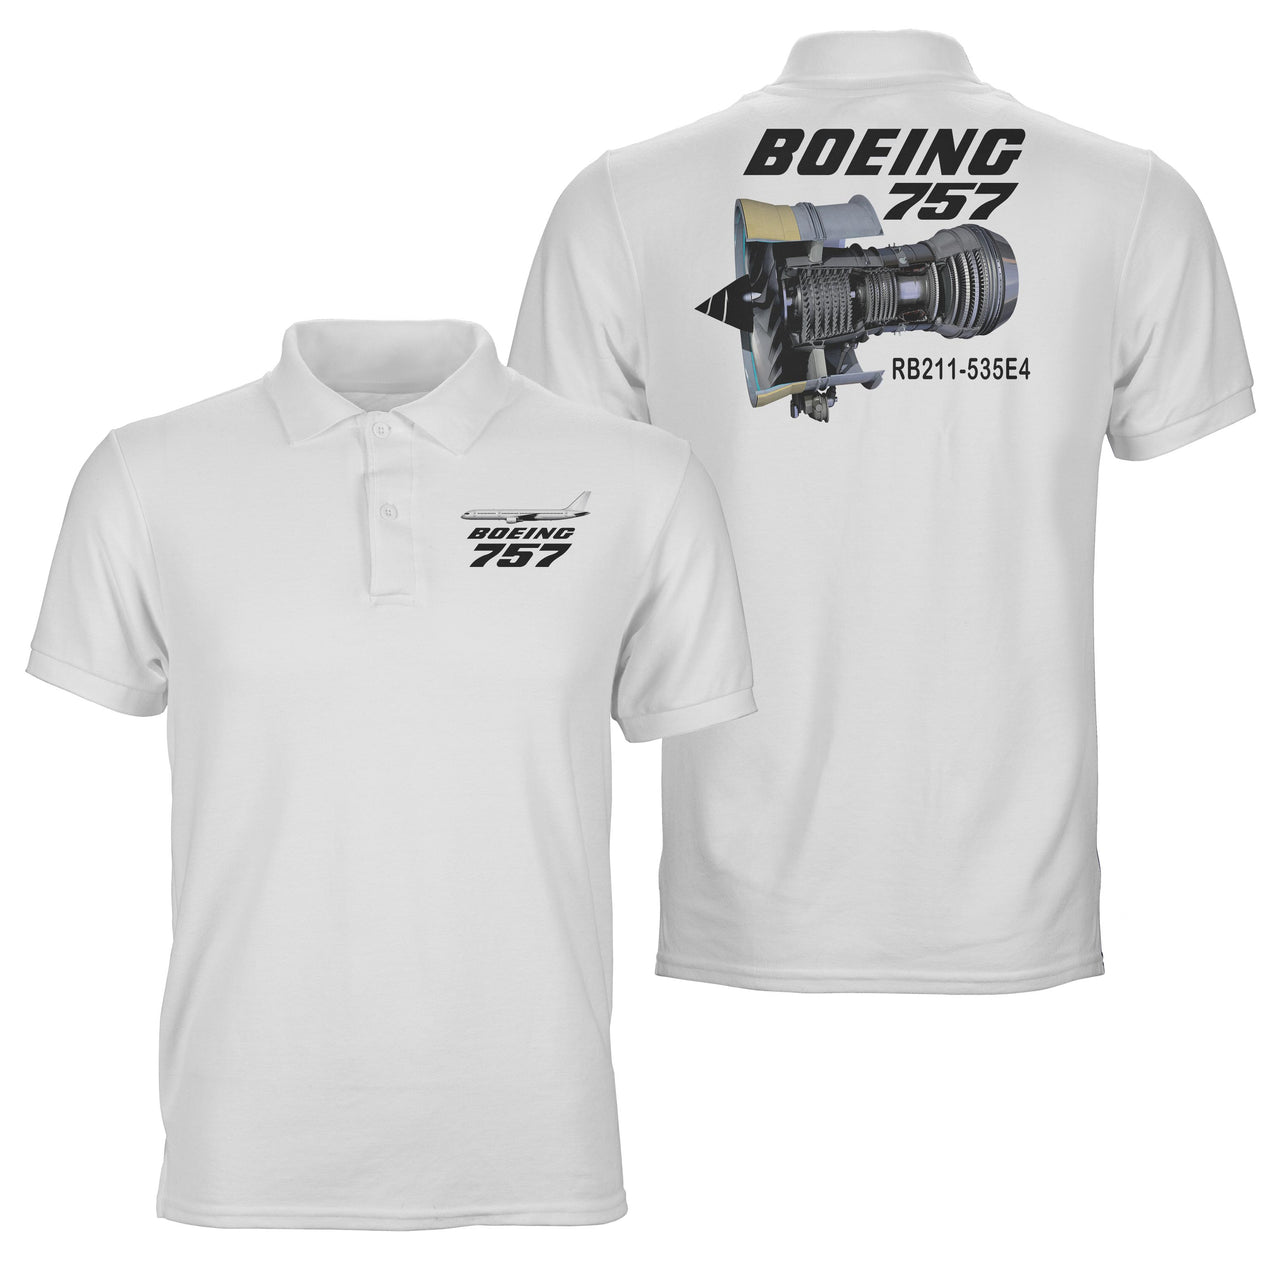 Boeing 757 & Rolls Royce Engine (RB211) Designed Double Side Polo T-Shirts